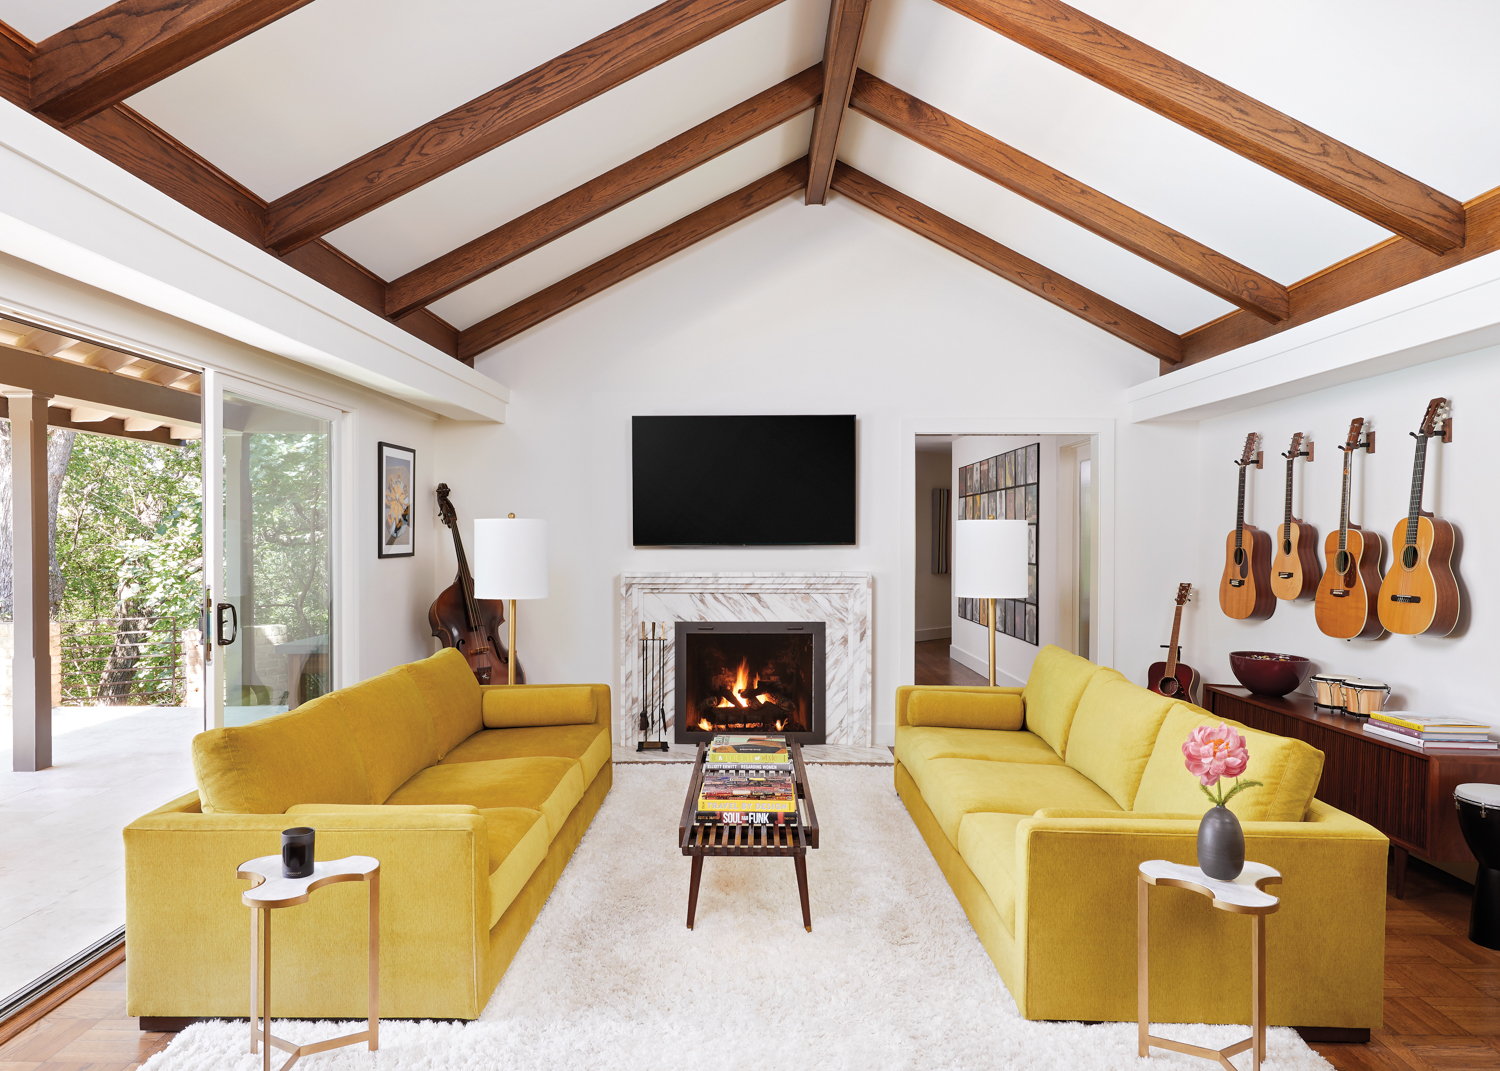 Living room with vaulted ceiling and beams and a pair of yellow sofas flanking a marble mantel